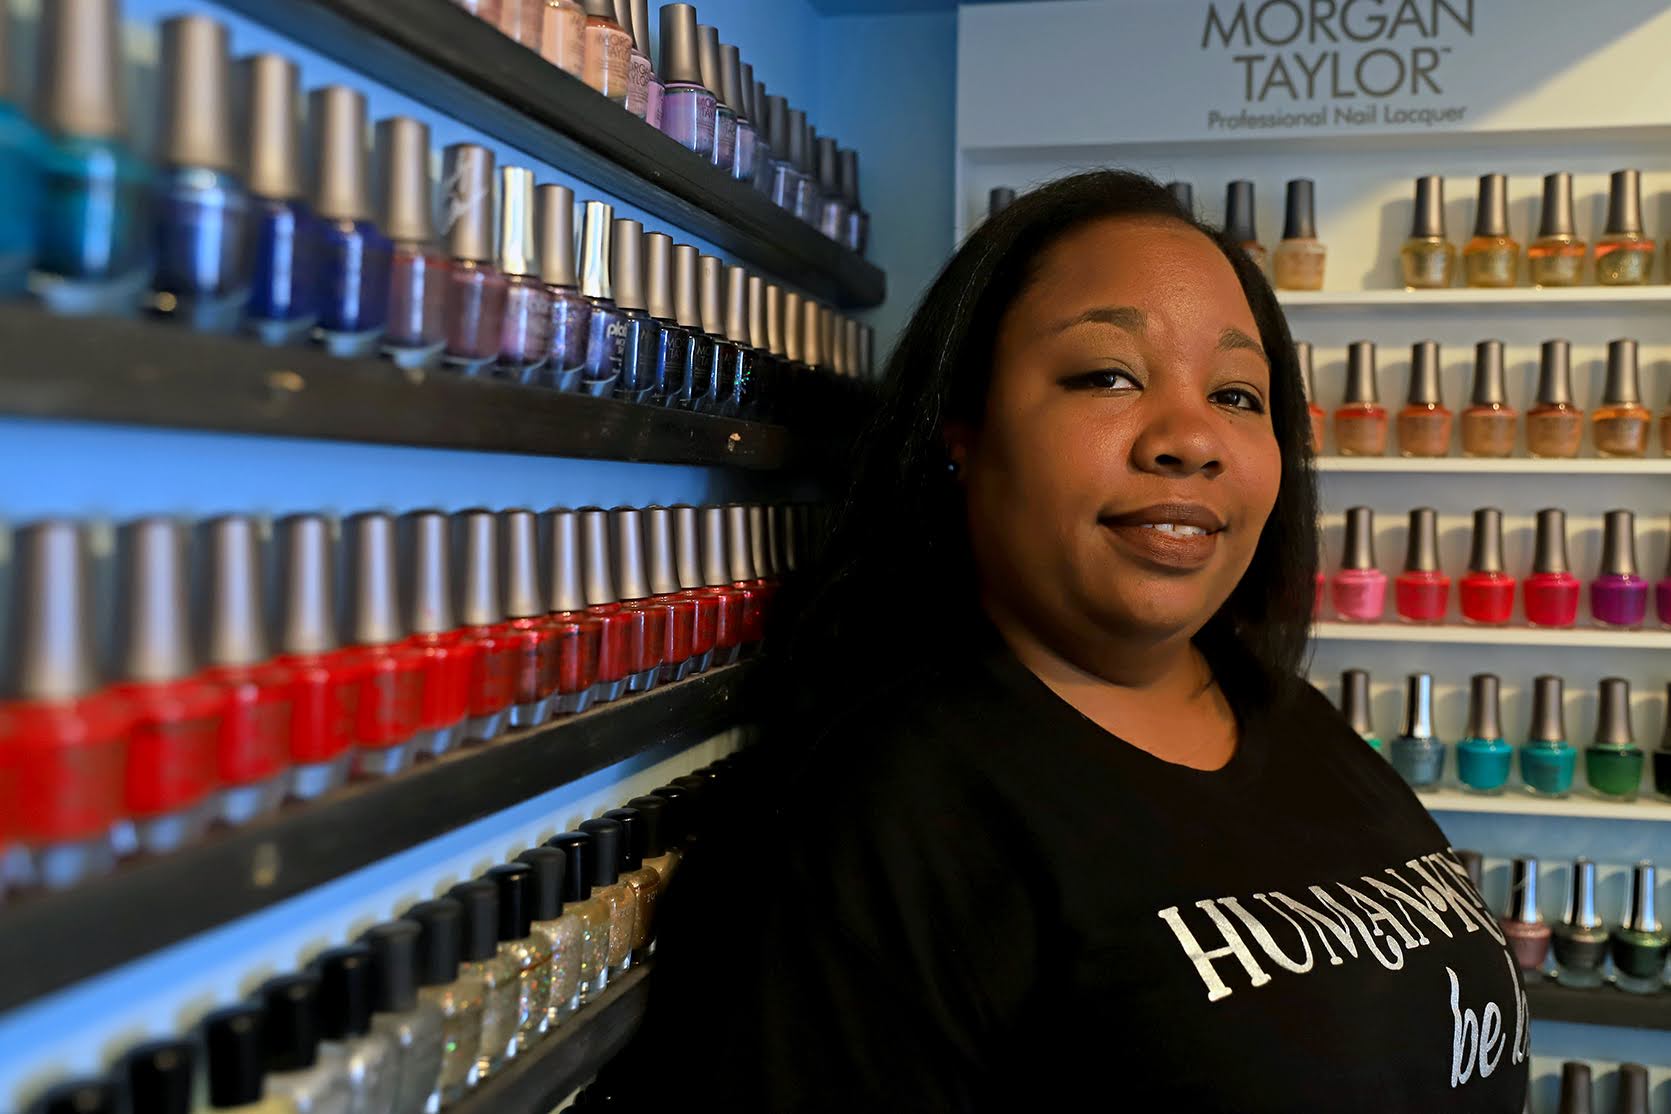 A Black woman stands in front of a row of nail polish colors.